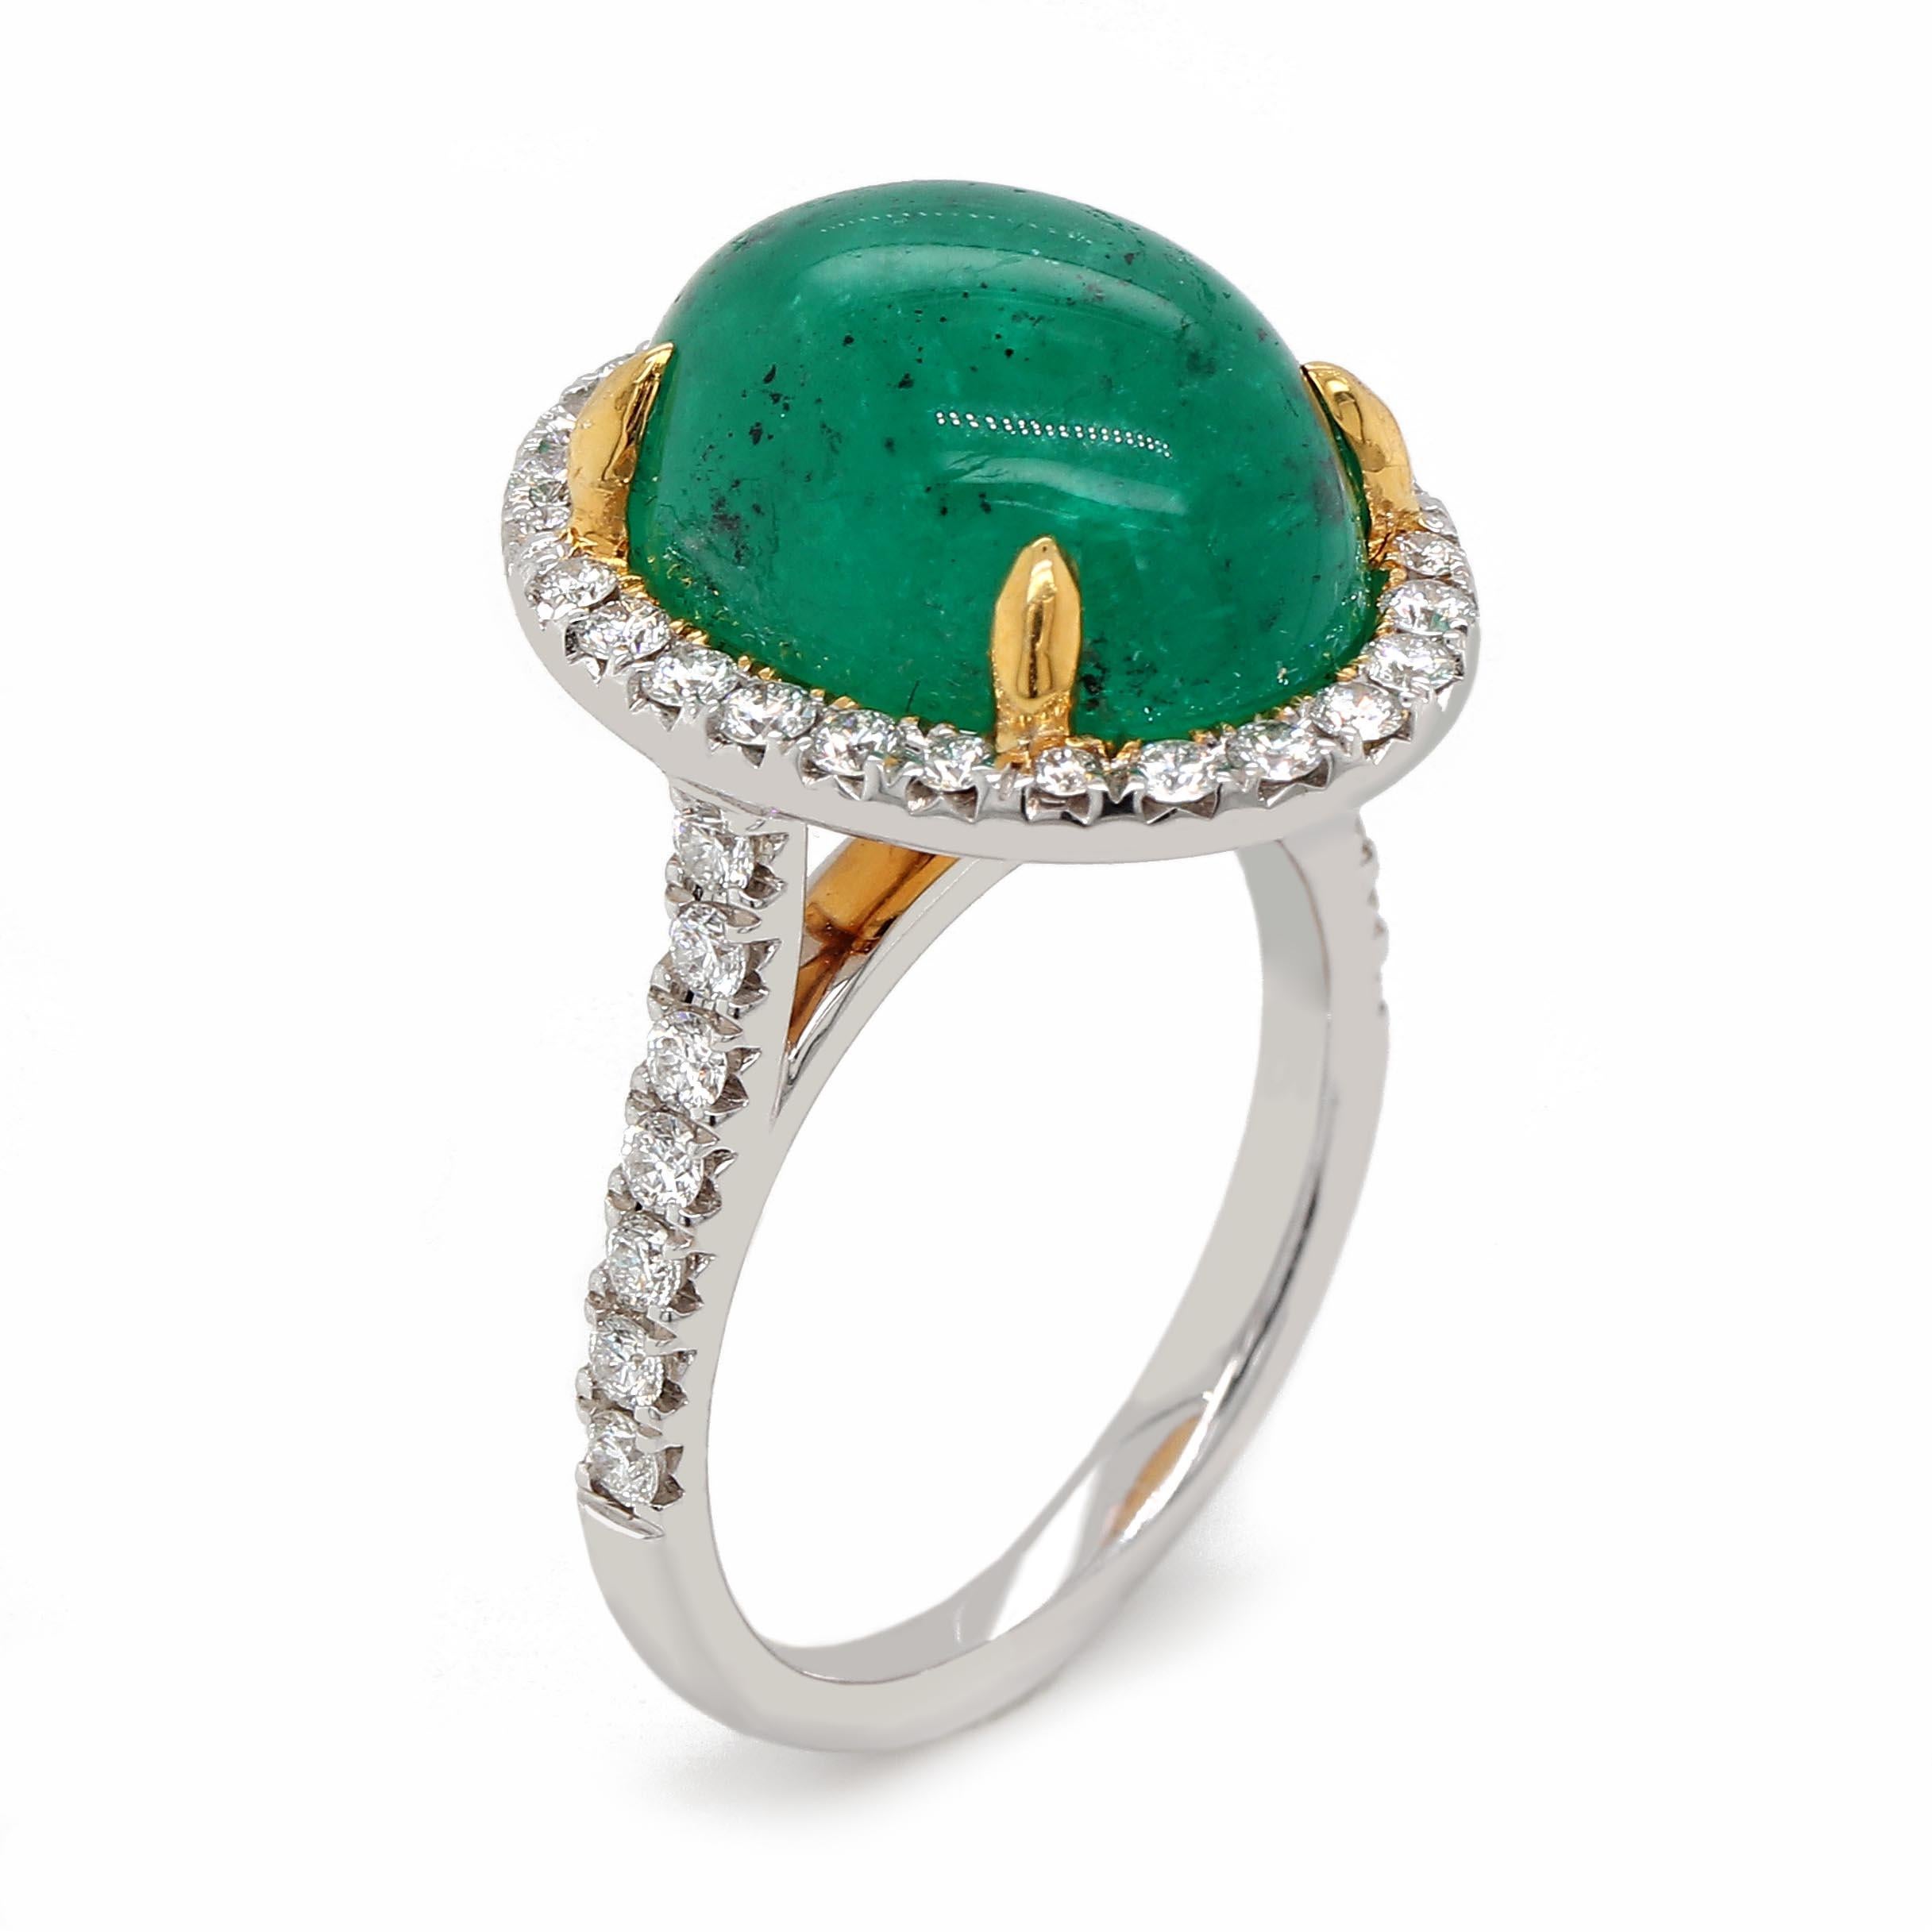 GIA certified oval cabochon emerald of about 9.17 carats surrounded by 40 round brilliant cut diamonds of about 0.70 carats with a clarity of VS and color G. All set in a 18k two tone ring. Total weight of the ring is approximately 8.82 grams.

GIA